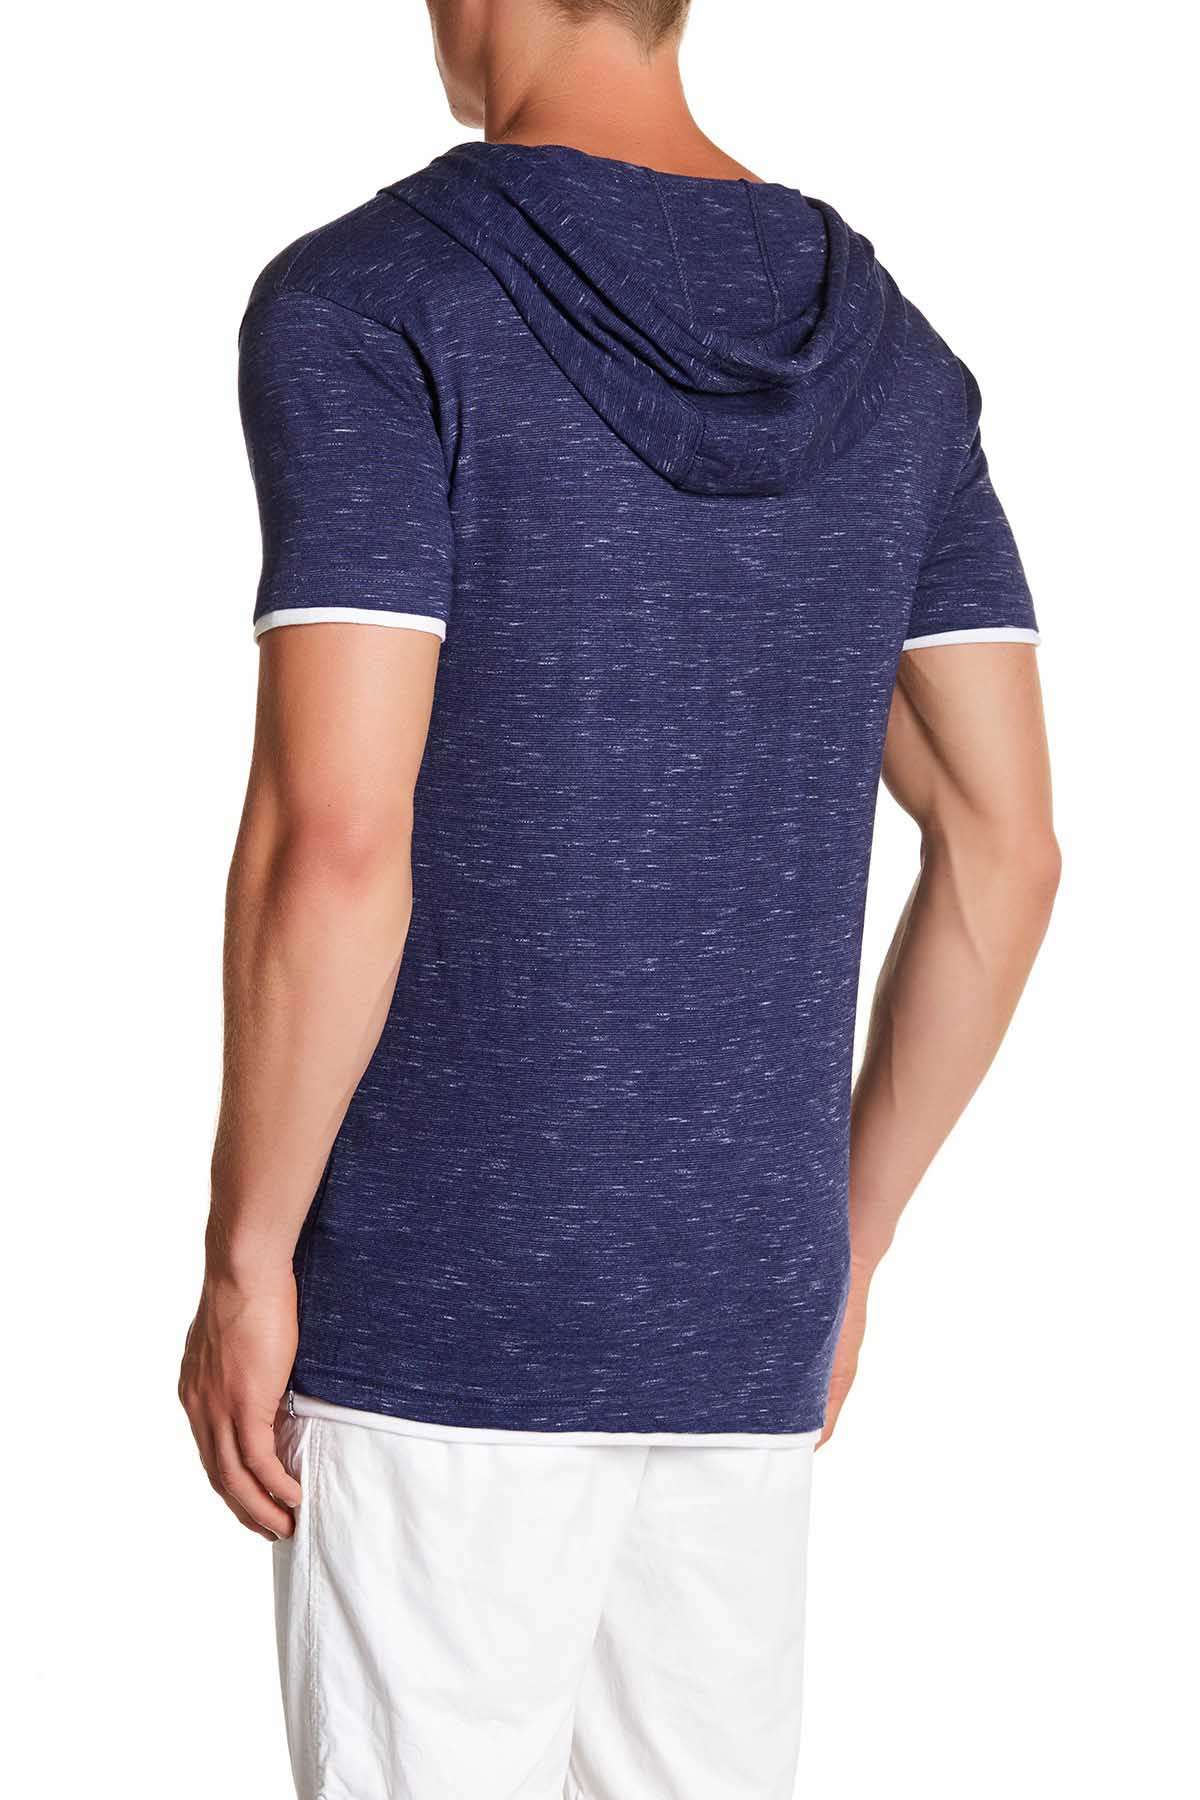 Pop Icon Blue Space-Dyed Hooded Henley